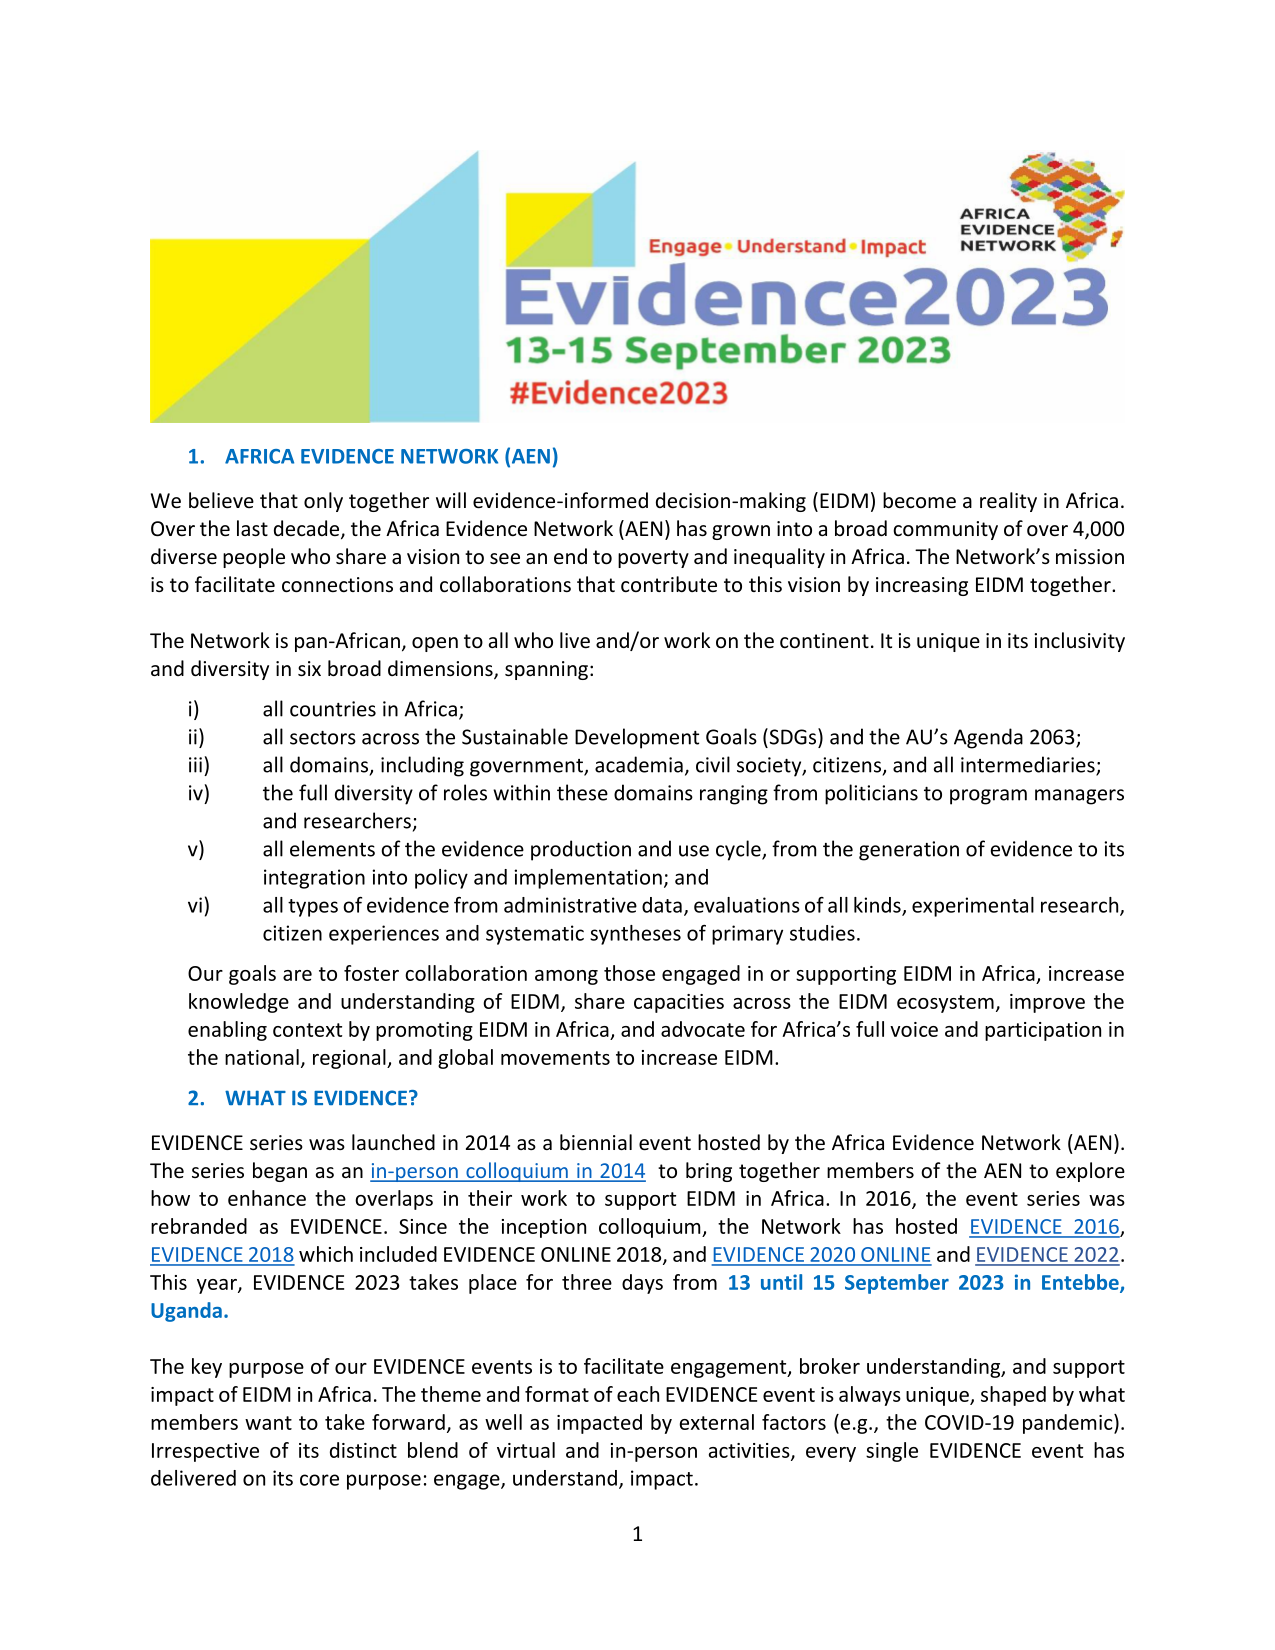 Evidence 2023 concept note